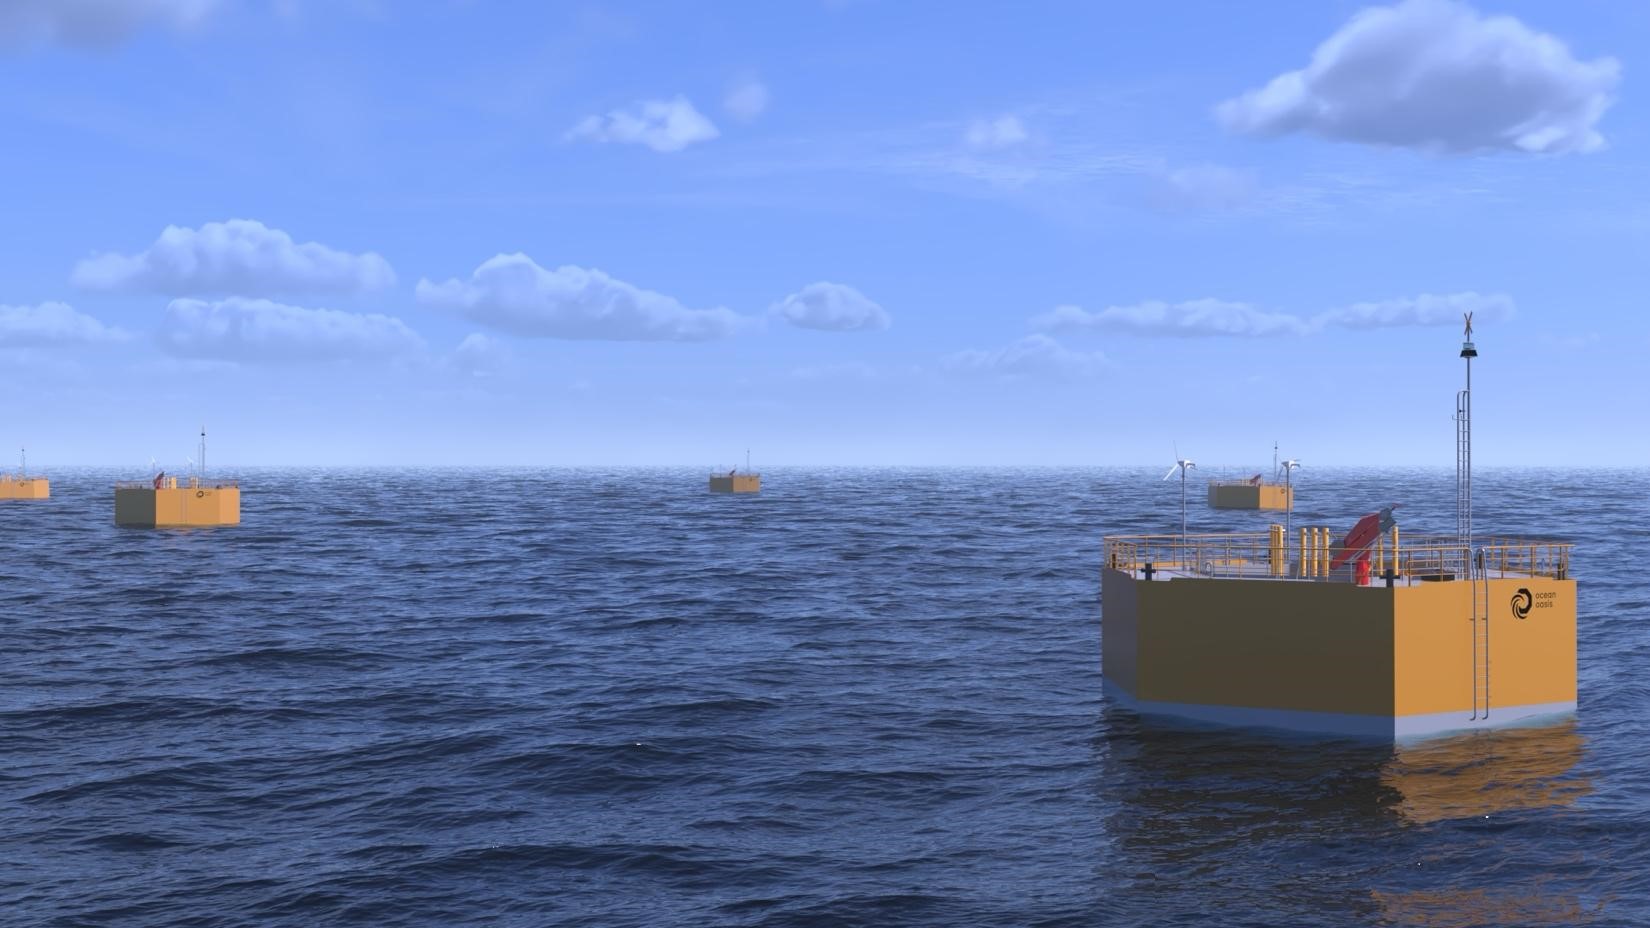 Illustration: Rendering of future offshore water farm with multiple Ocean Oasis desalination buoys deployed